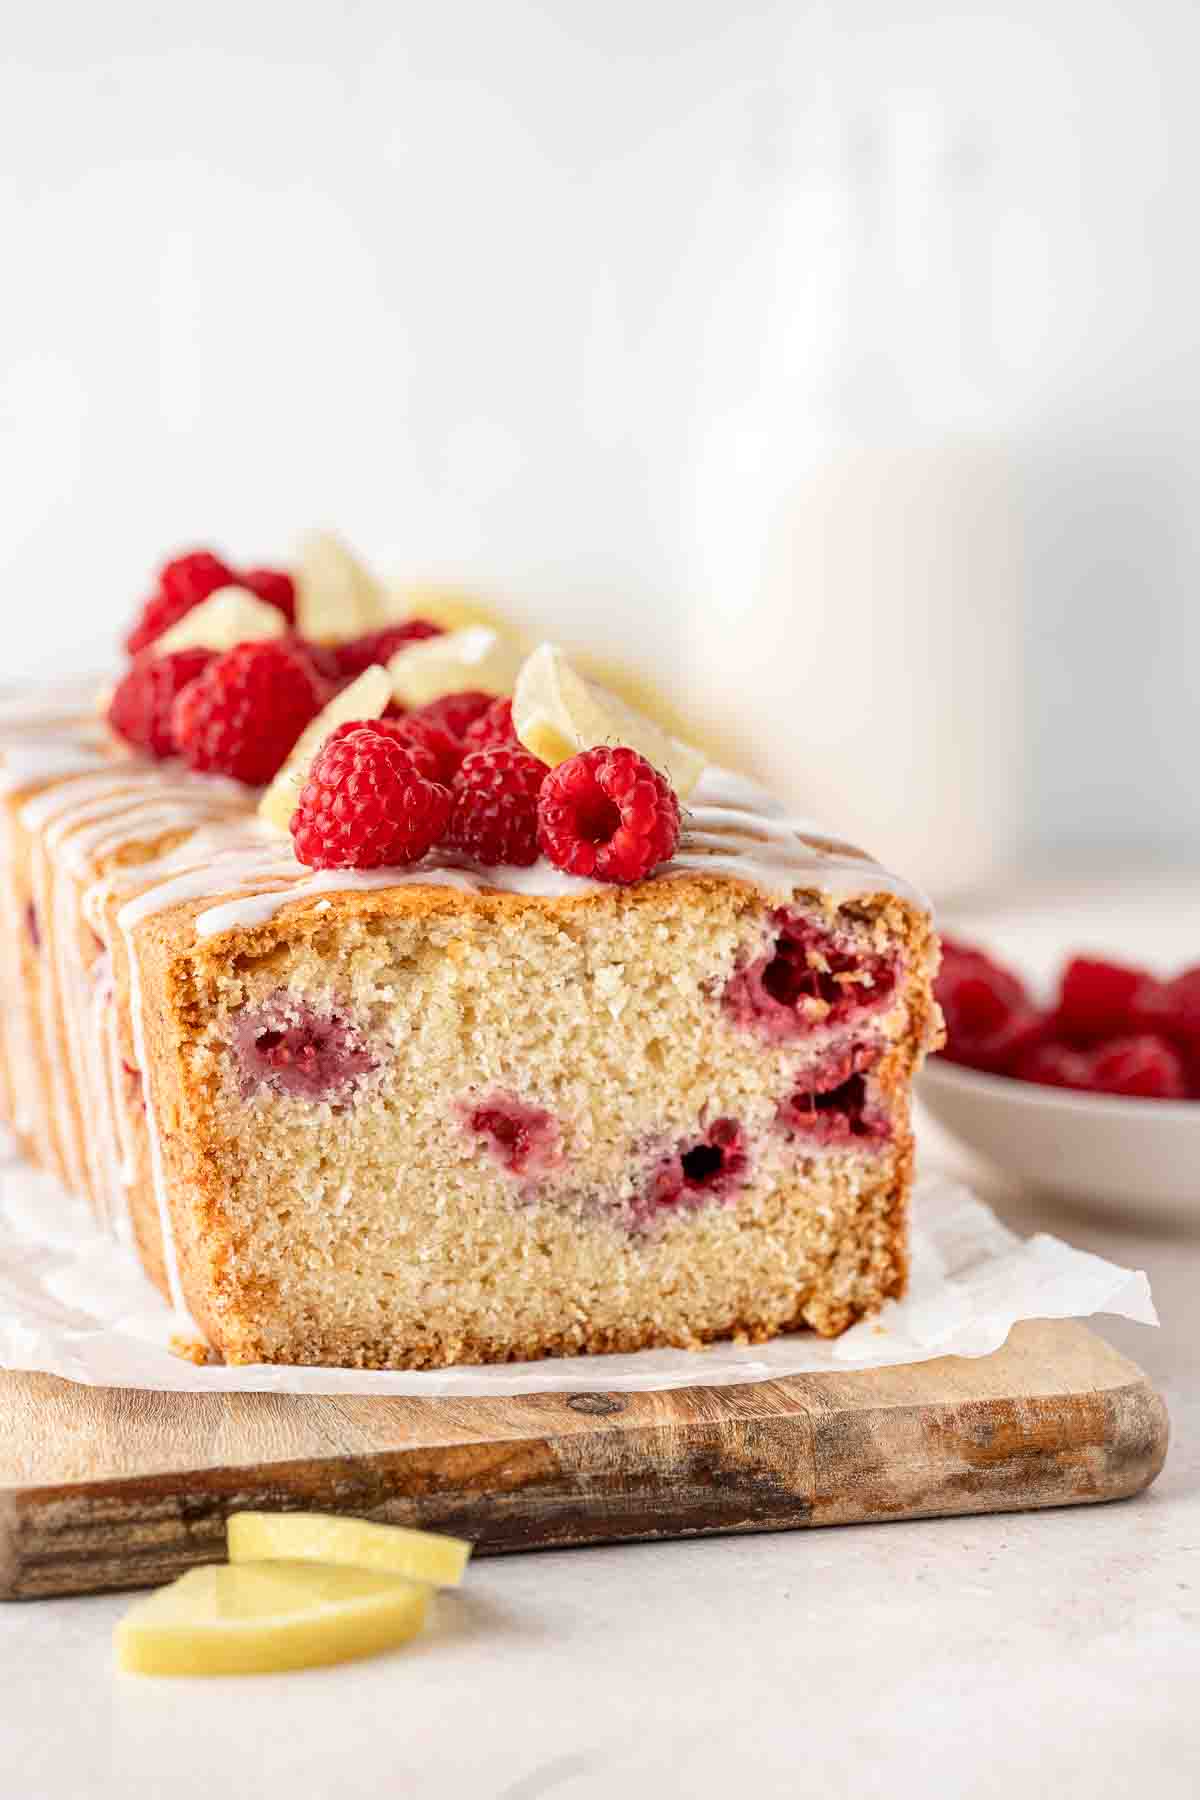 Close up of the sliced lemon and raspberry cake with raspberries on top.